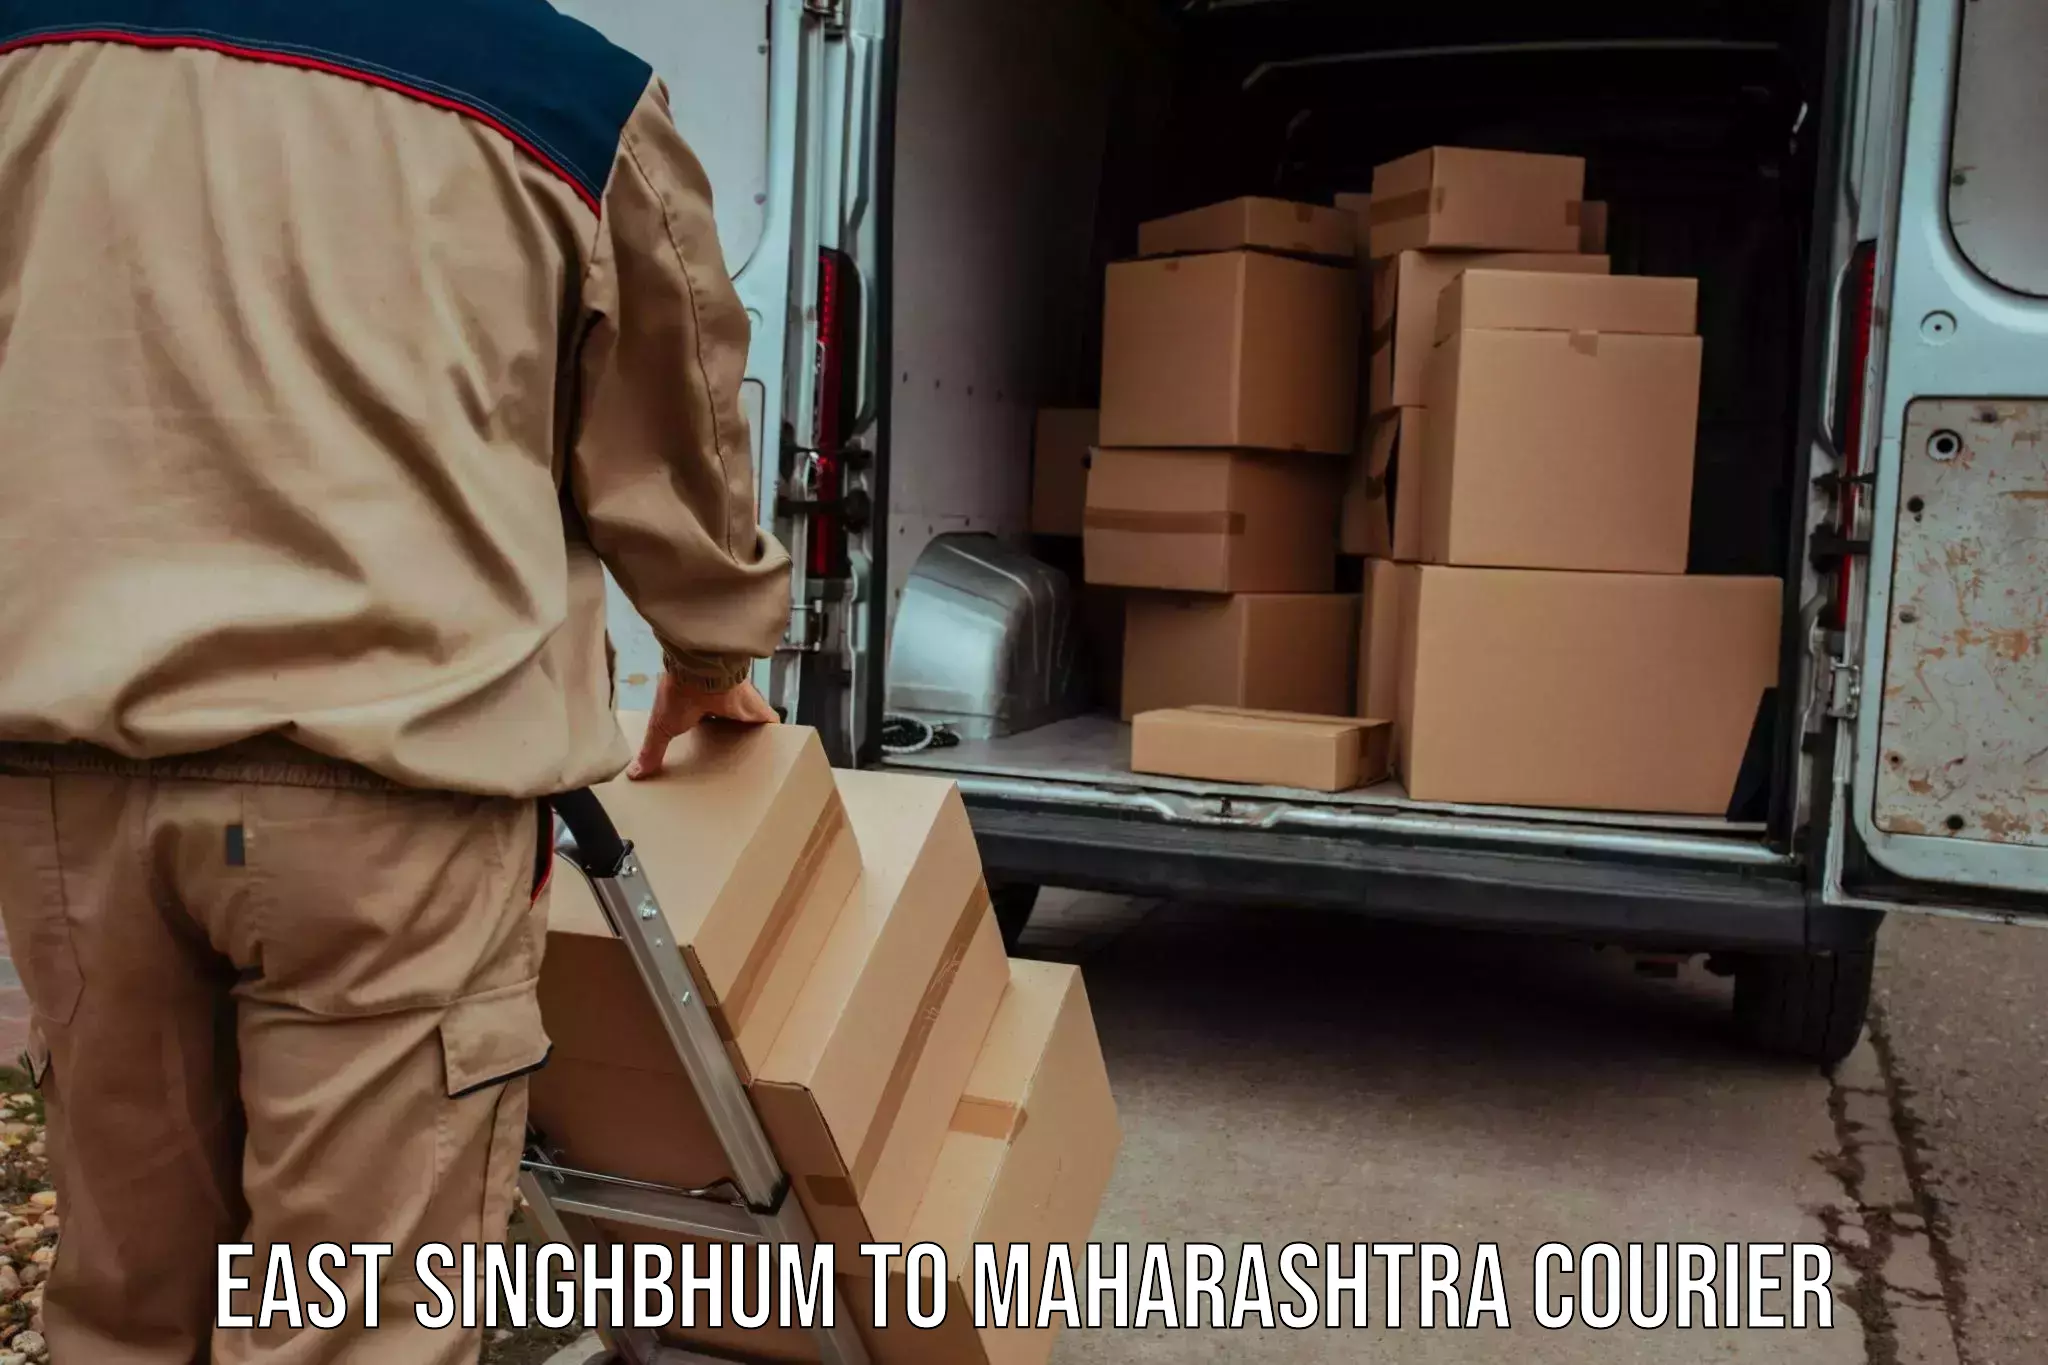 Multi-national courier services East Singhbhum to Kamthi Kamptee